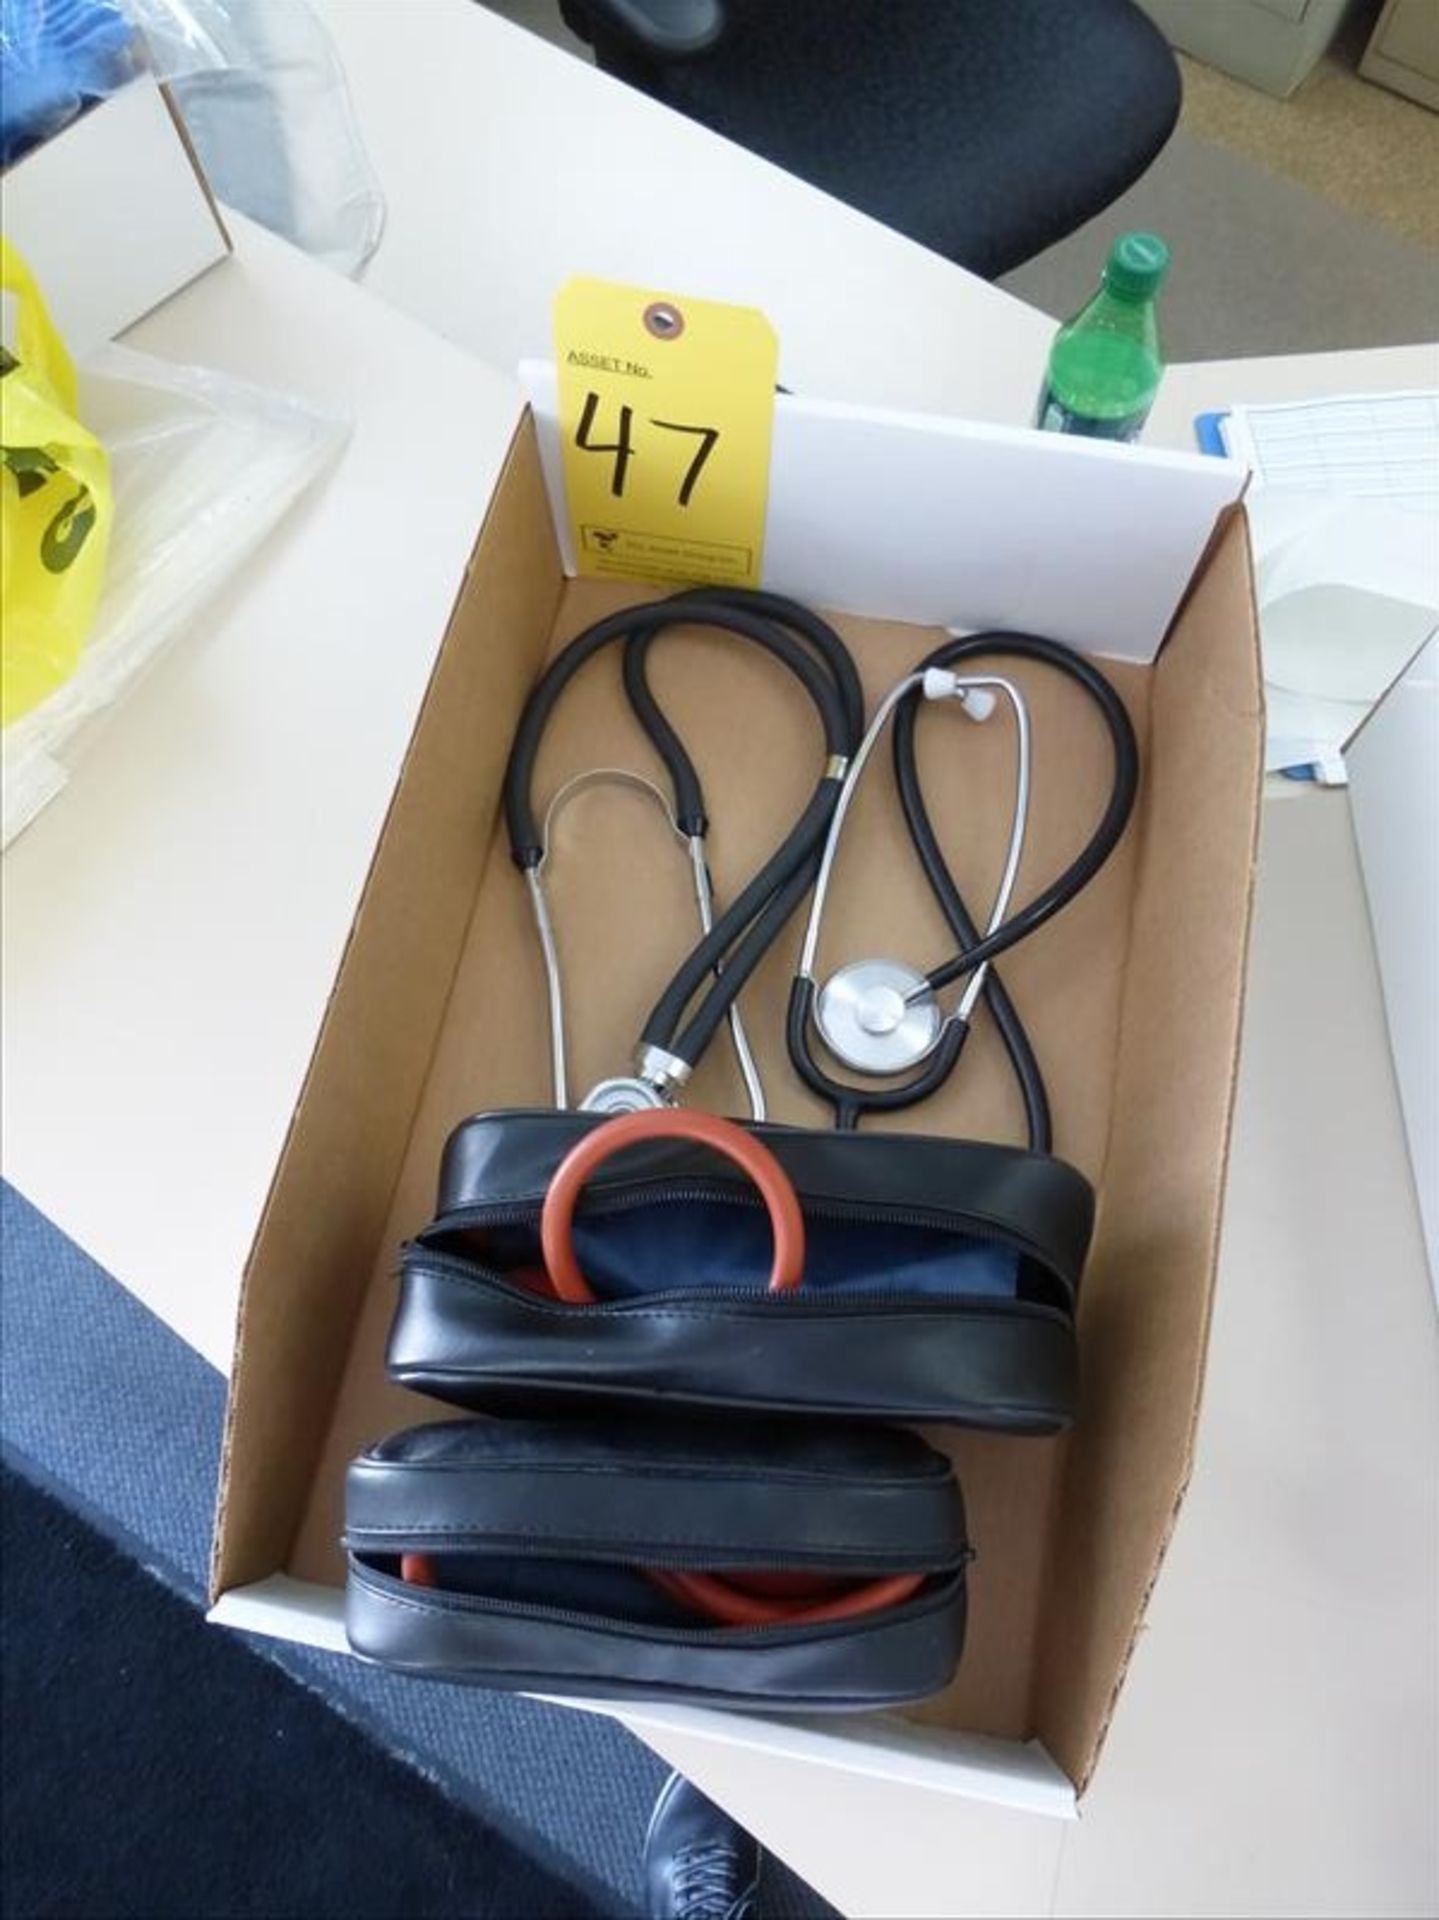 (2) blood pressure units and (2) stethoscopes. [Winner will be determined based on sum of bids on